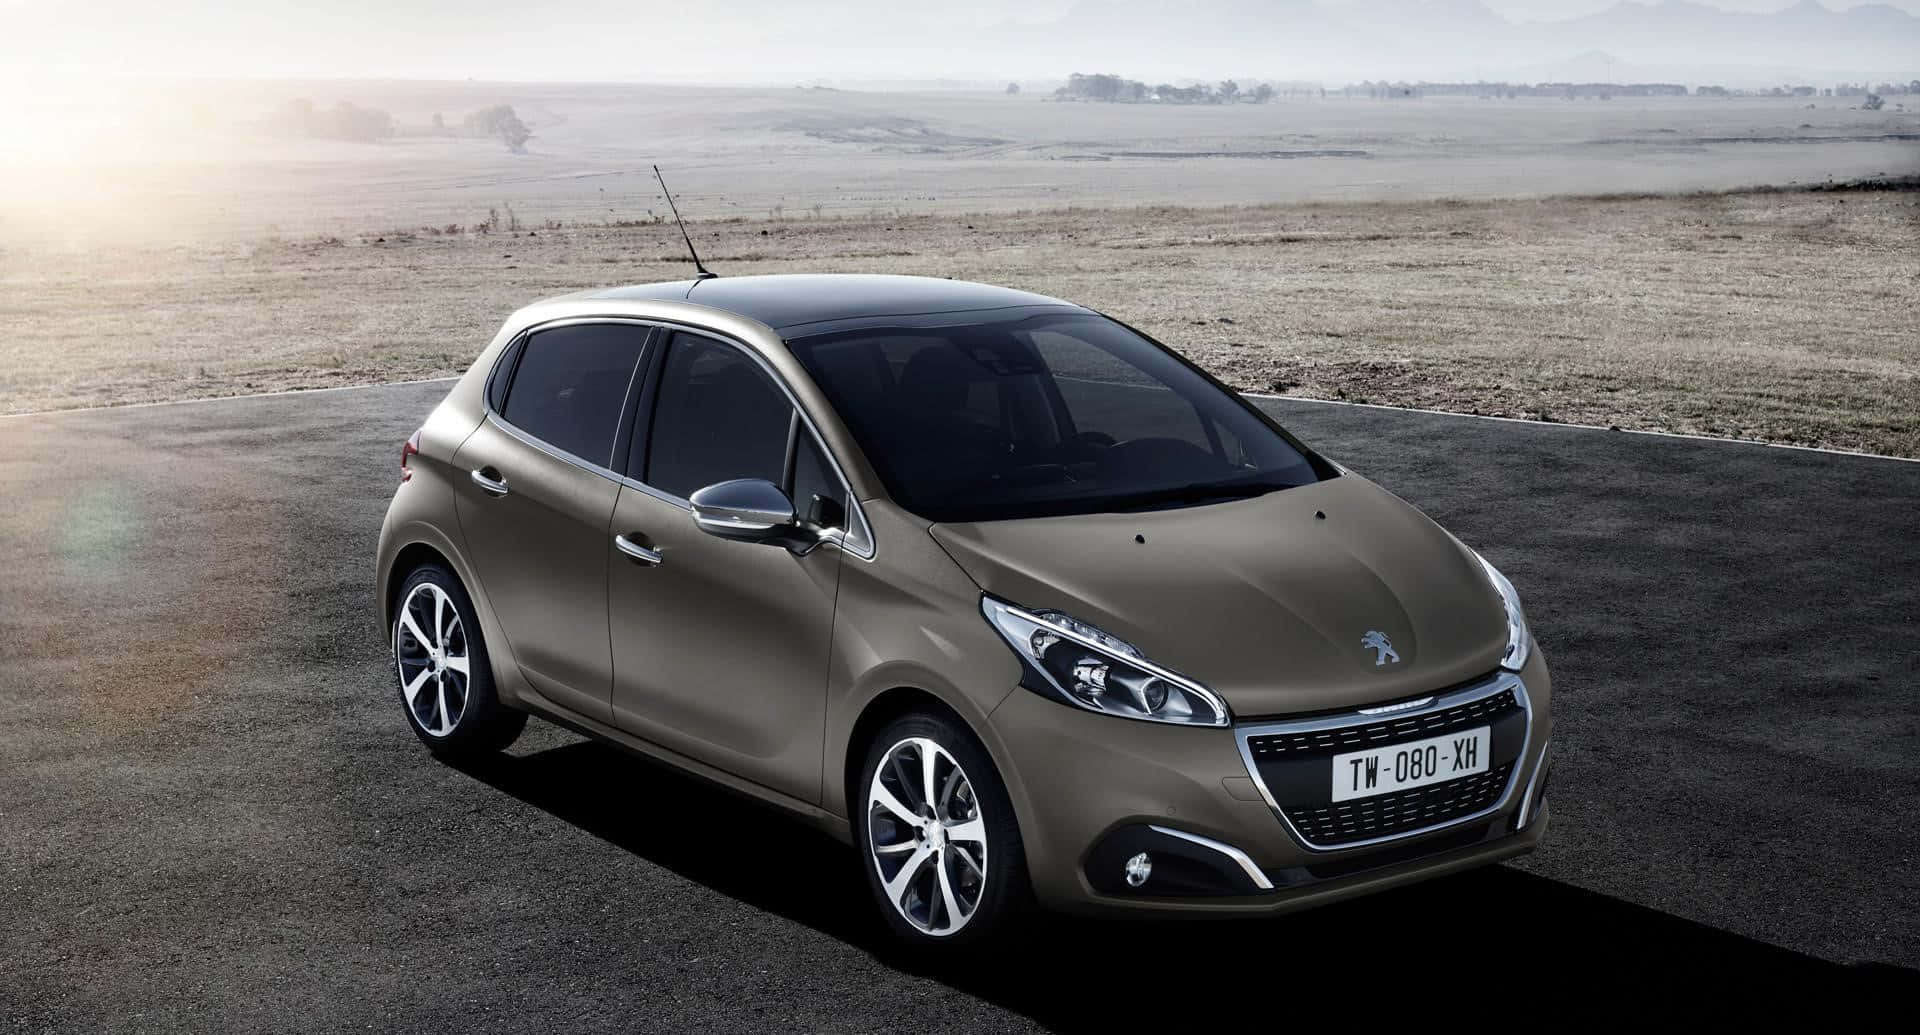 Sleek and Stylish Peugeot 208 on the Open Road Wallpaper